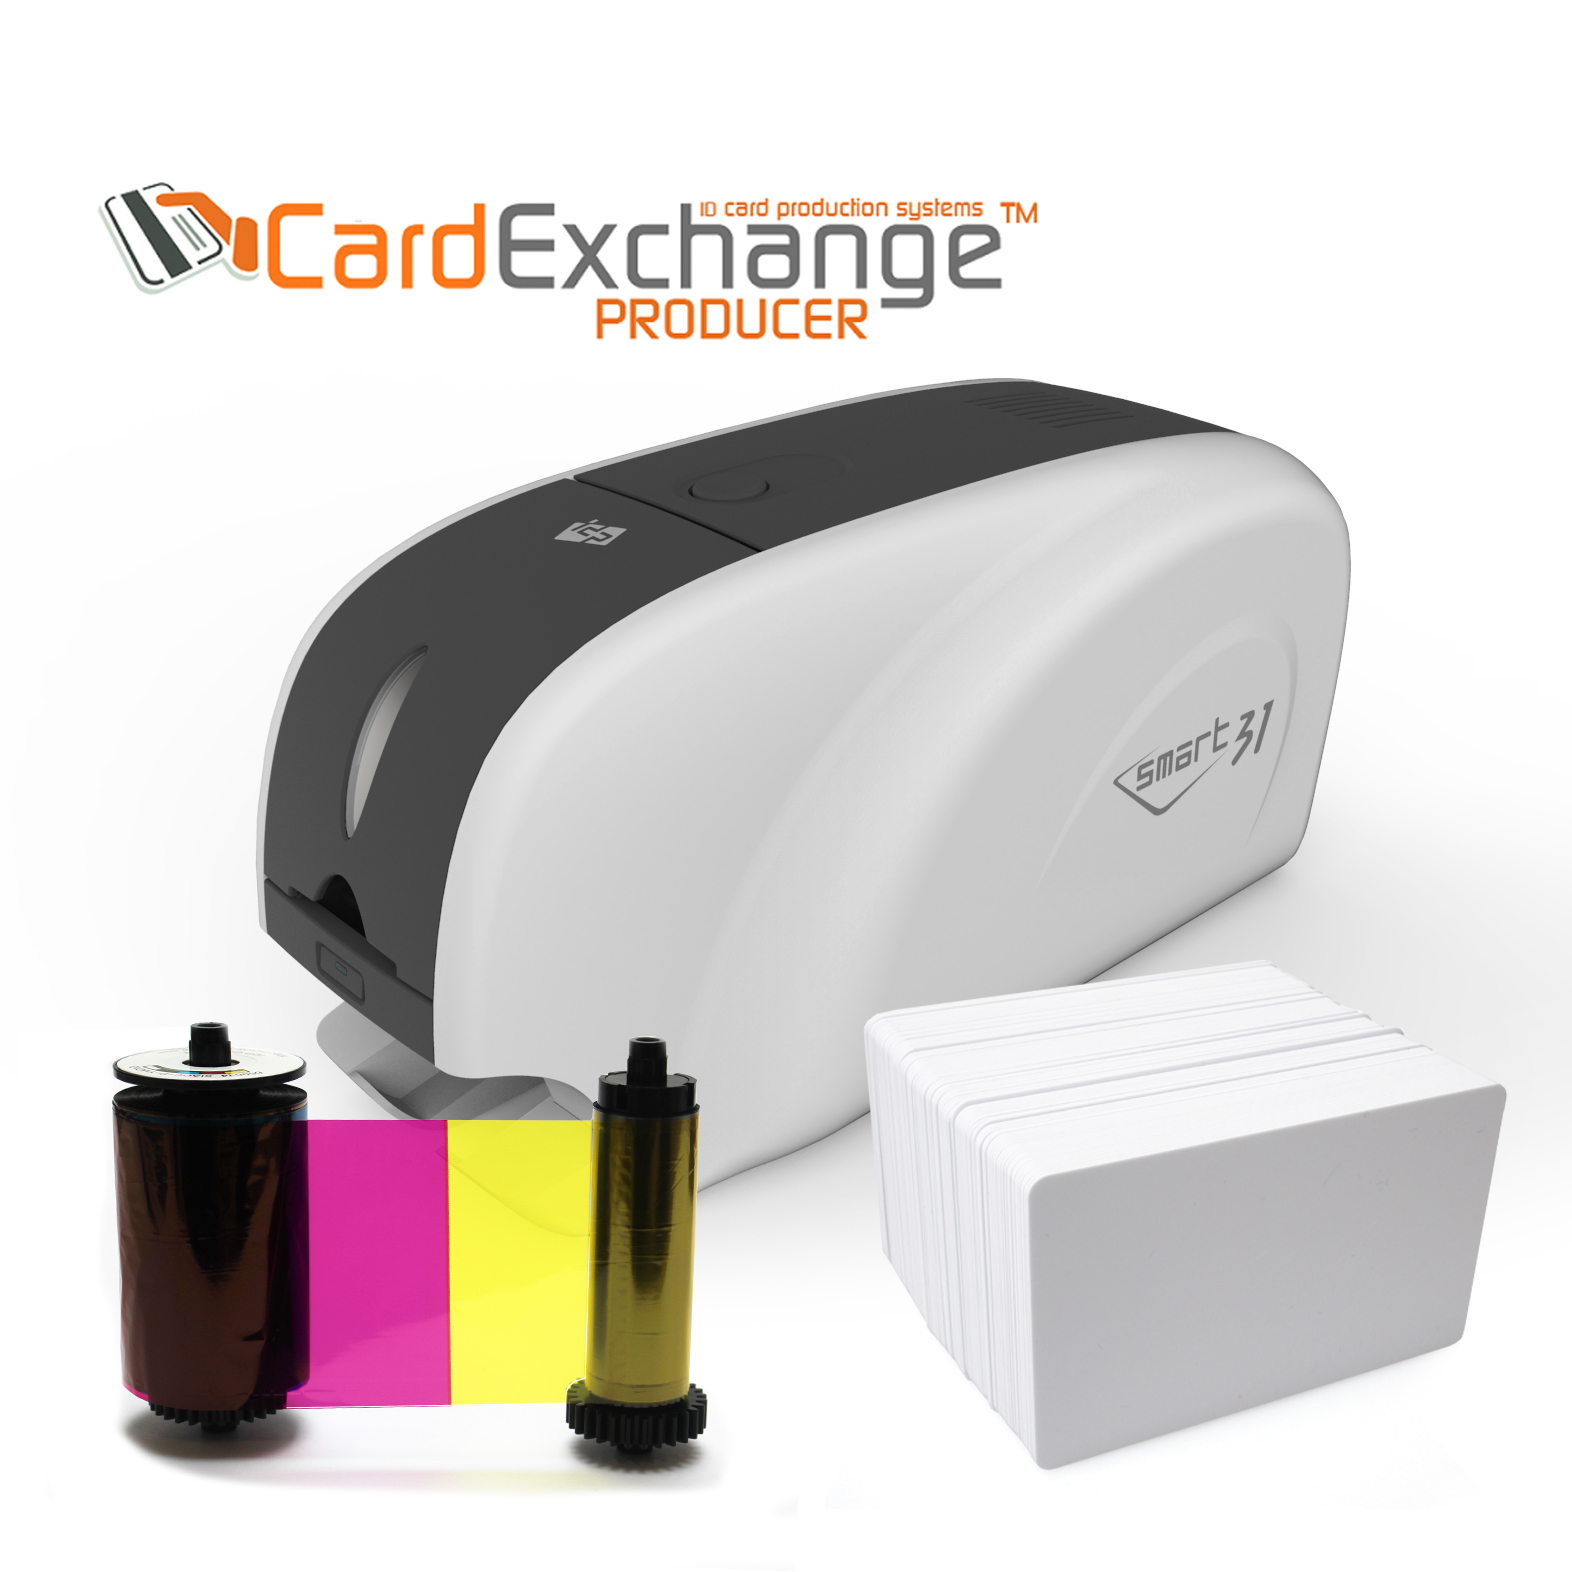 IDP SMART-31 Series ID Card Simplex Printer Kit with Software Manual and Guides Includes 250-Print YMCKO Color Ribbon and 100 PVC Plastic Cards 